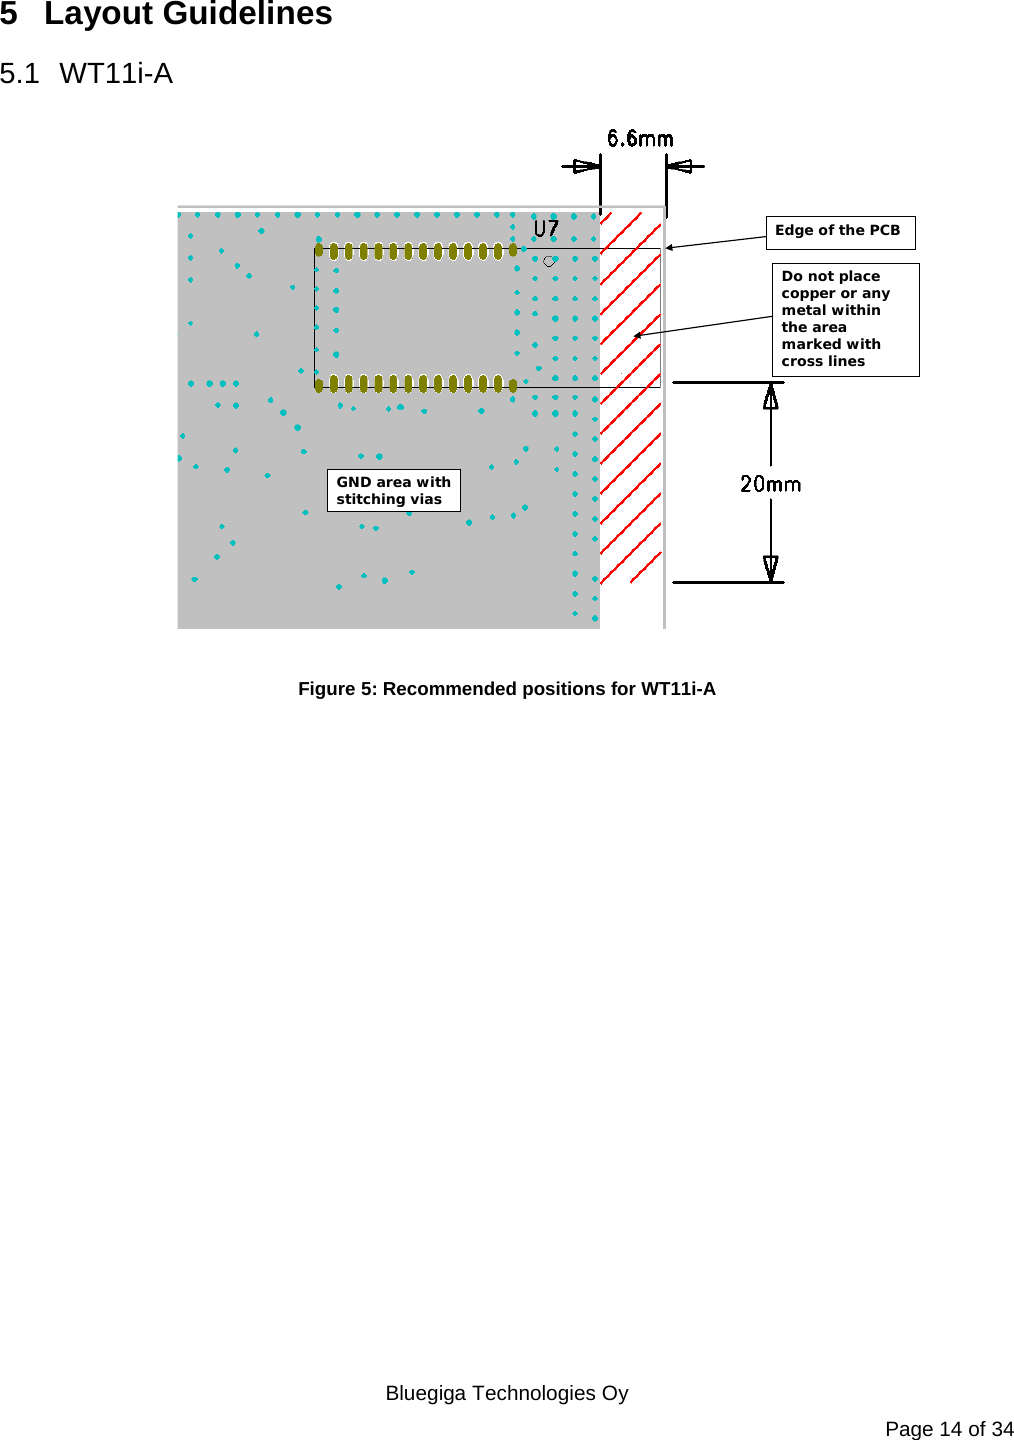   Bluegiga Technologies Oy Page 14 of 34 5  Layout Guidelines 5.1 WT11i-A Edge of the PCBDo not place copper or any metal within the area marked with cross linesGND area with stitching vias  Figure 5: Recommended positions for WT11i-A   